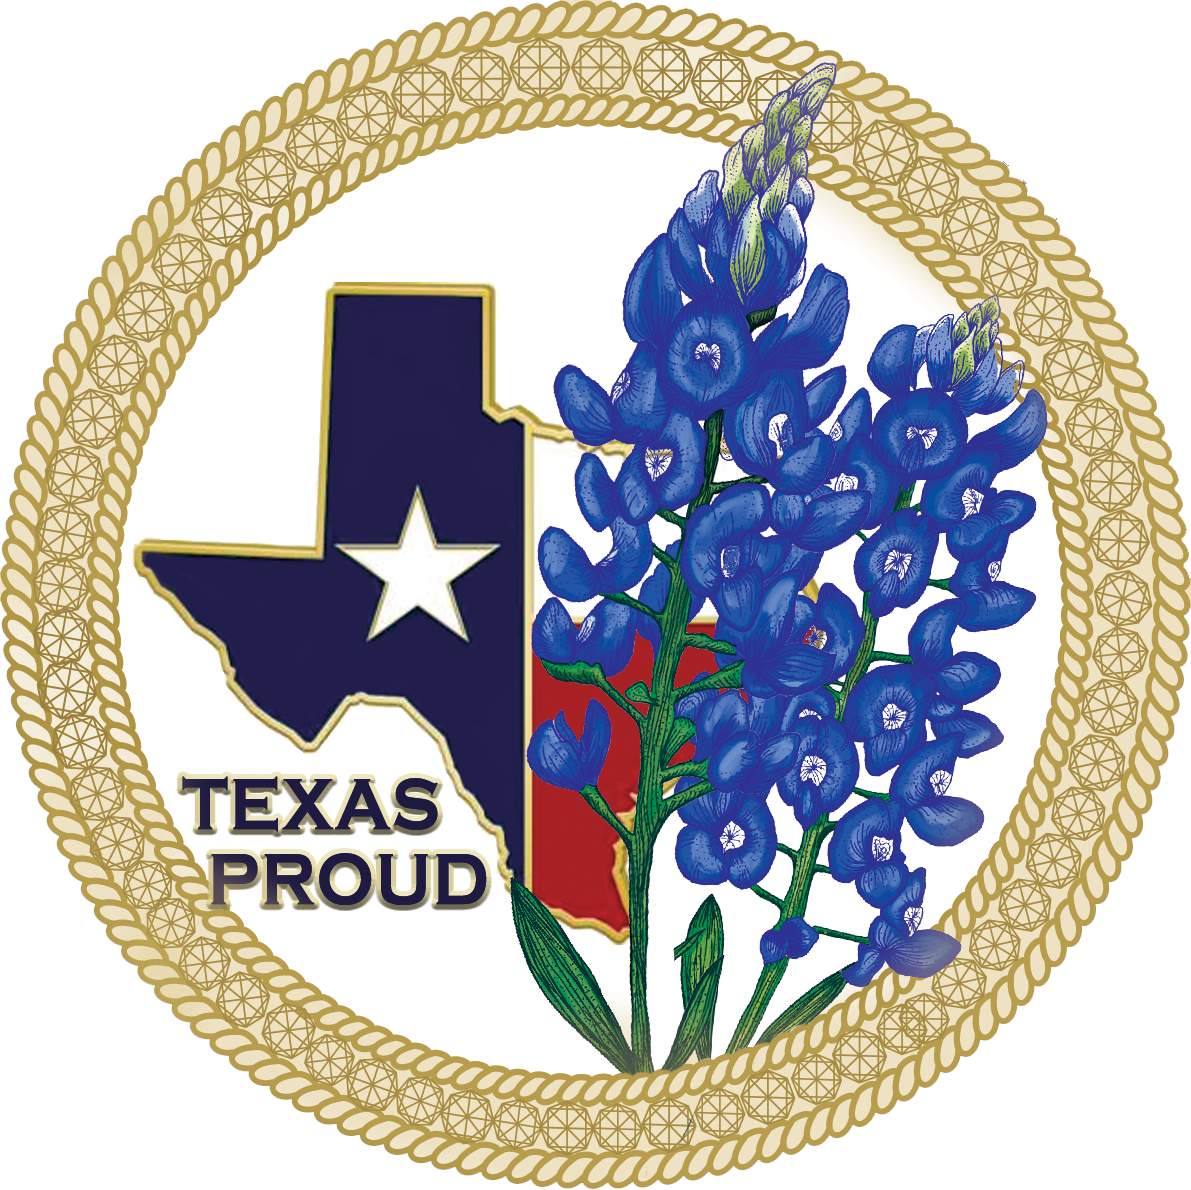 Texas Society Approval Image